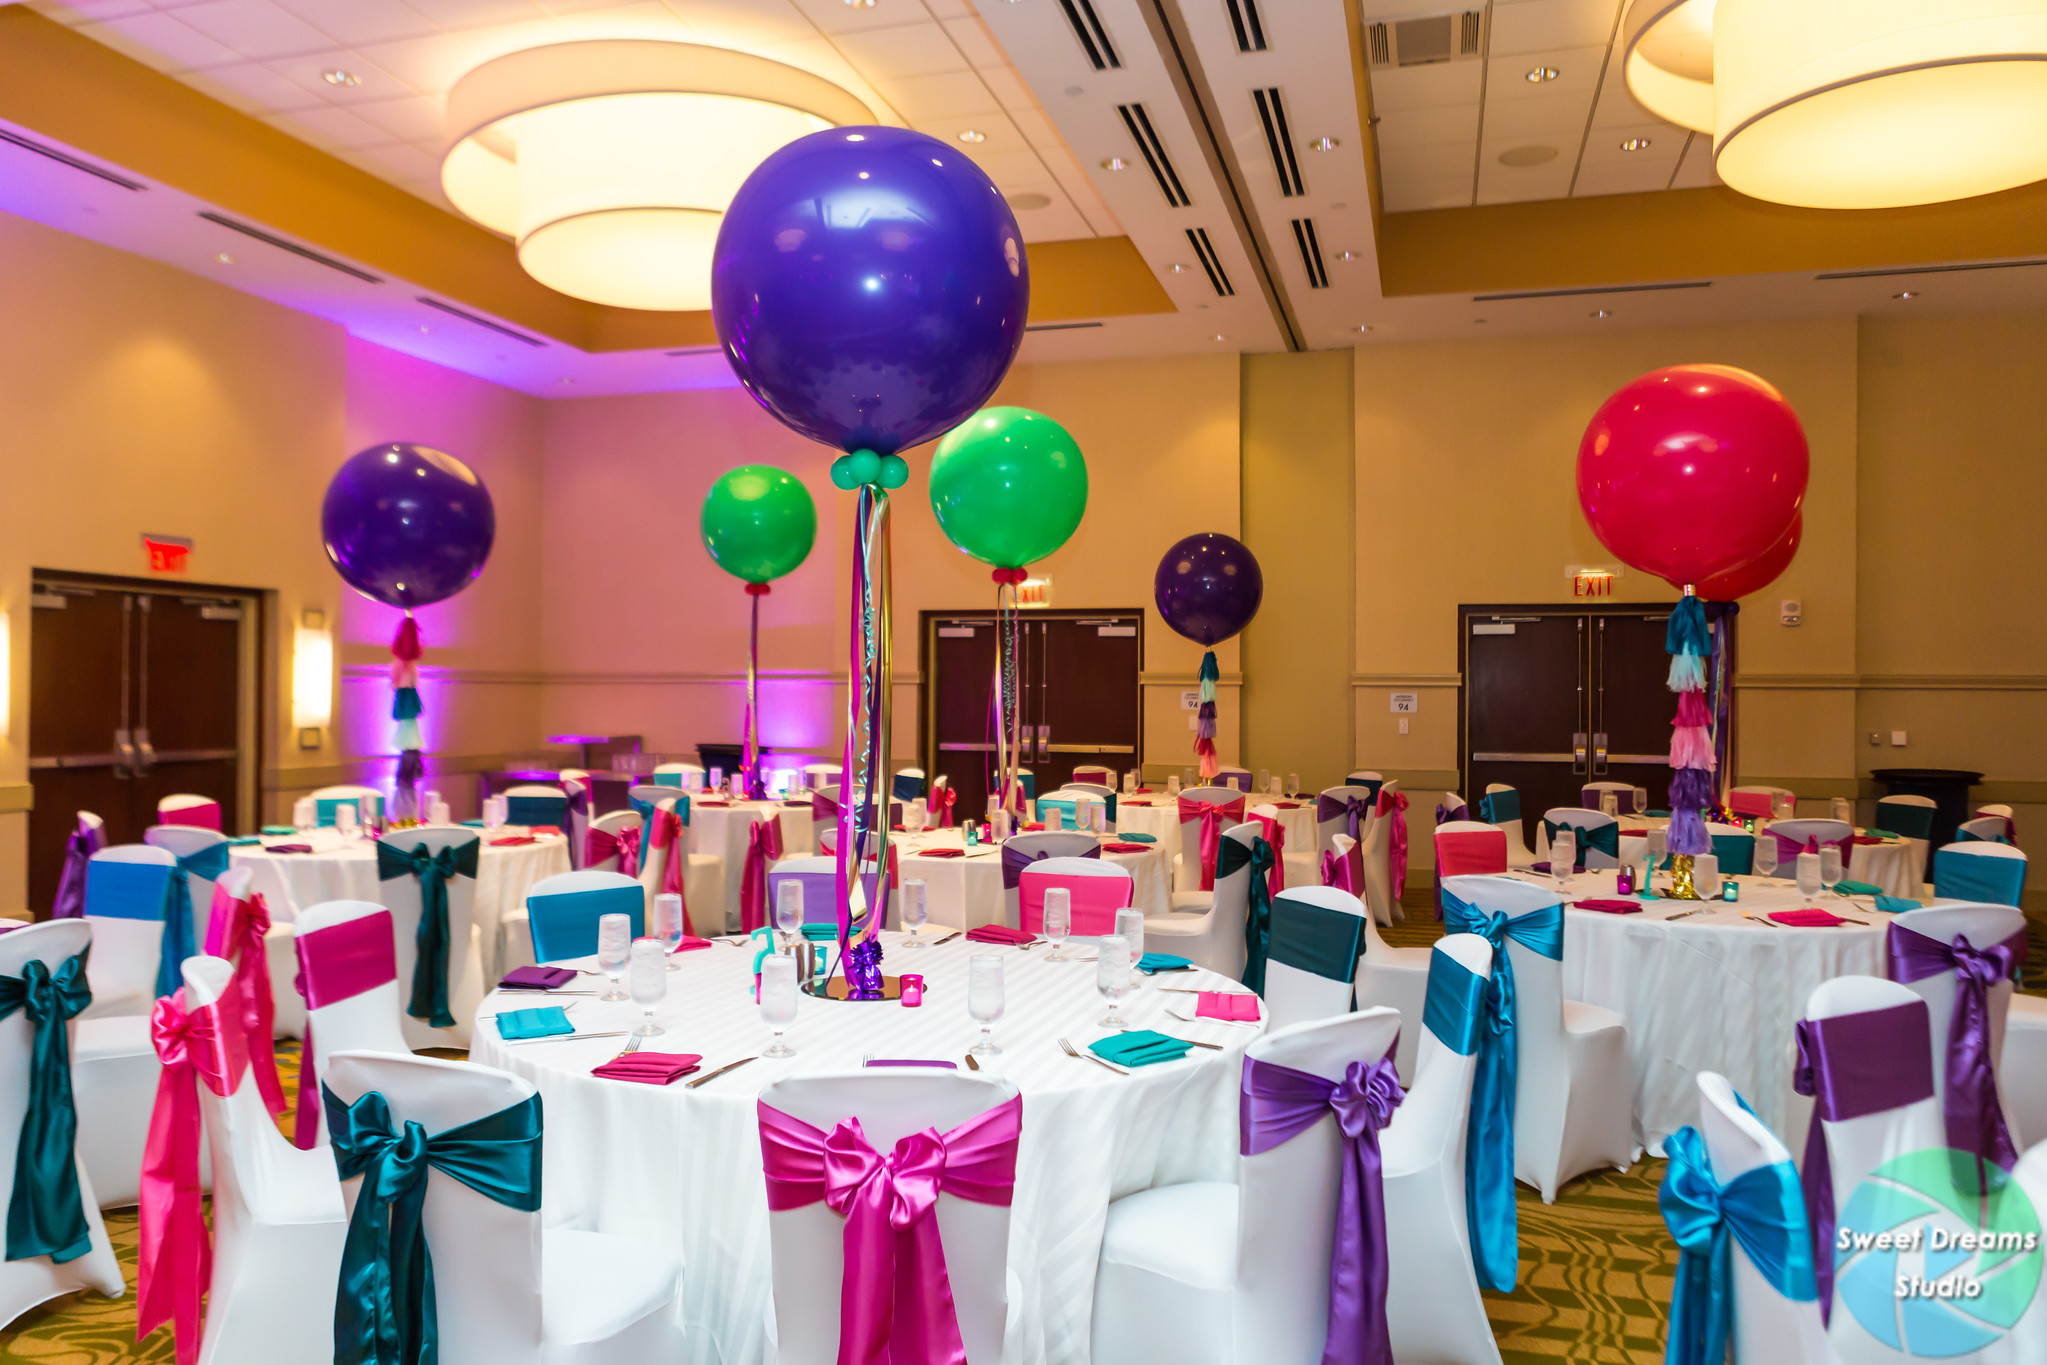 Liv it Up tassel balloon centerpieces at Olivia's colorful, jewel-toned, balloon-filled Bat Mitzvah party at Hyatt Regency Dulles. Pink, purple, teal, turquoise and gold. | Pop Color Events | Adding a pop of color to Bar & Bat Mitzvahs in DC, MD & VA | Photo by Sweet Dreams Studios